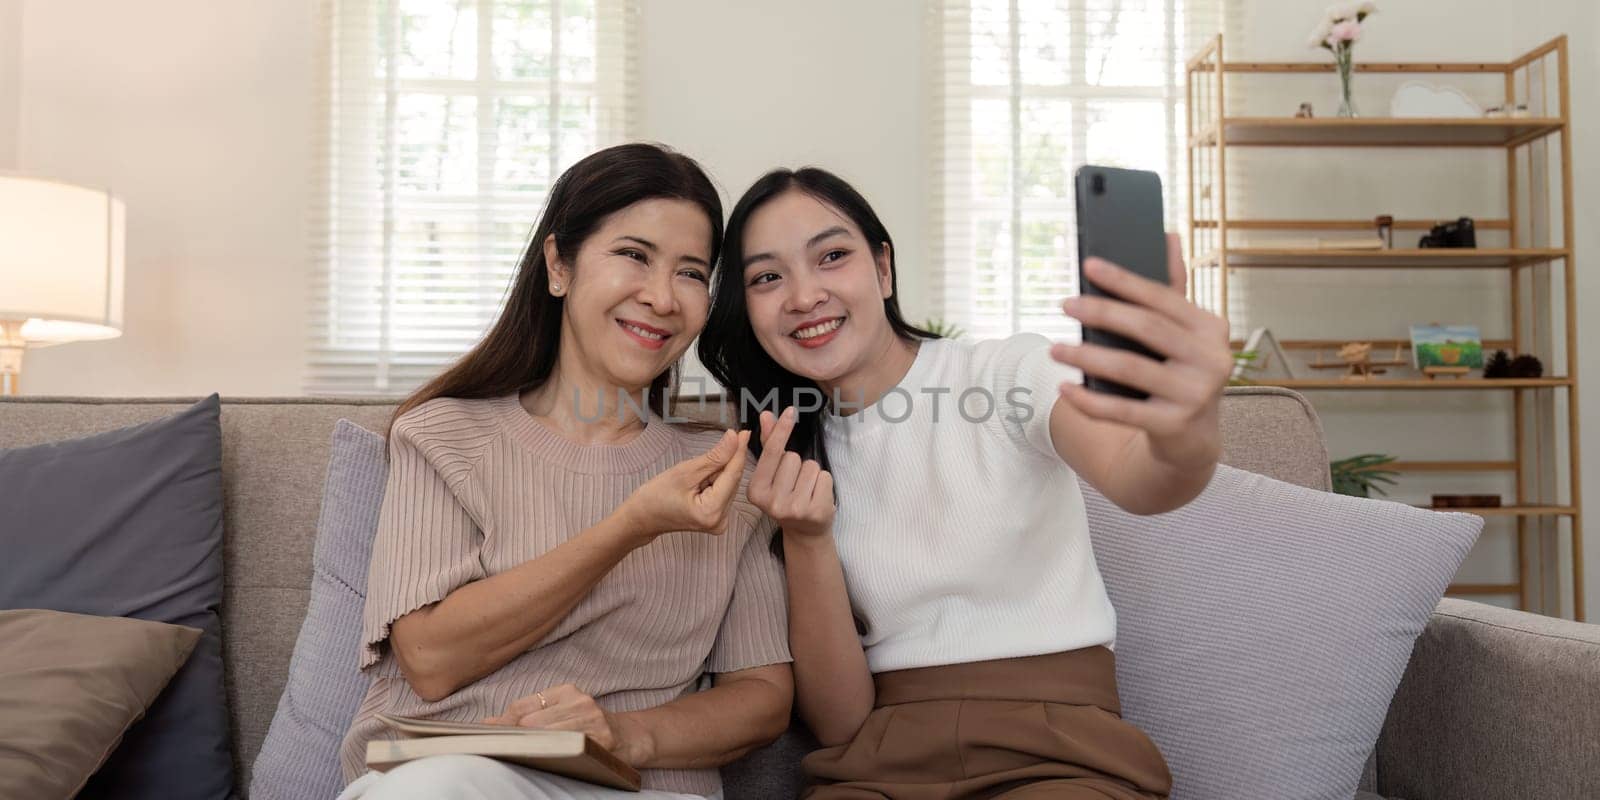 Daughter adult taking selfie using mobile phone with senior mother at home. Happy mother's day.